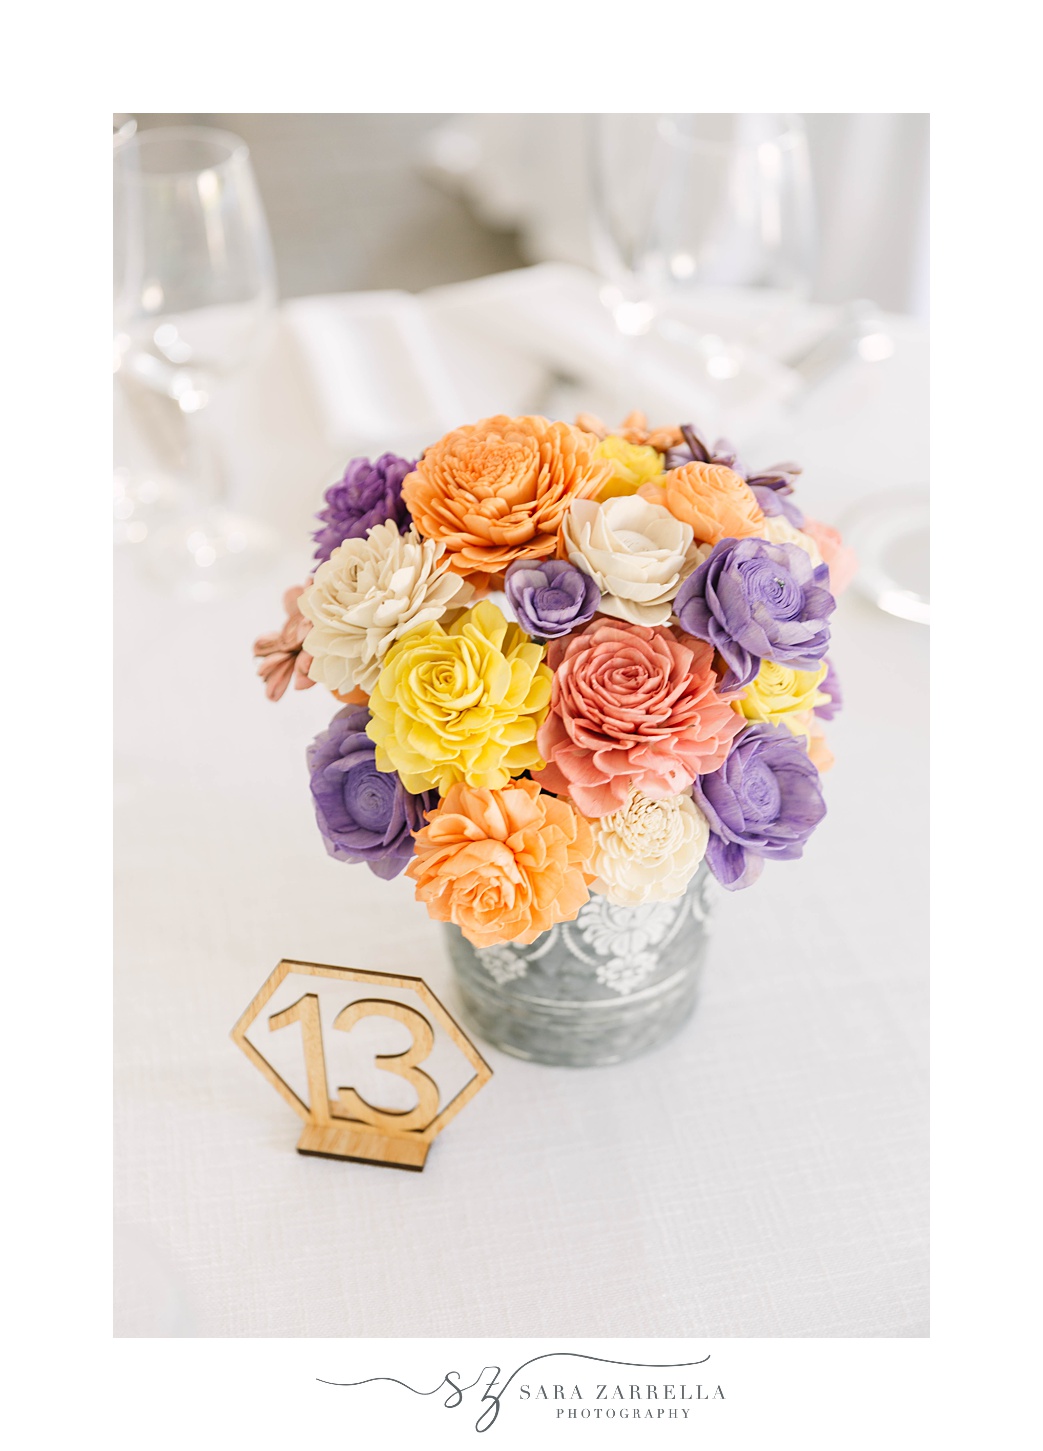 pastel pink, yellow, and purple wedding centerpiece for Blithewold Mansion wedding reception